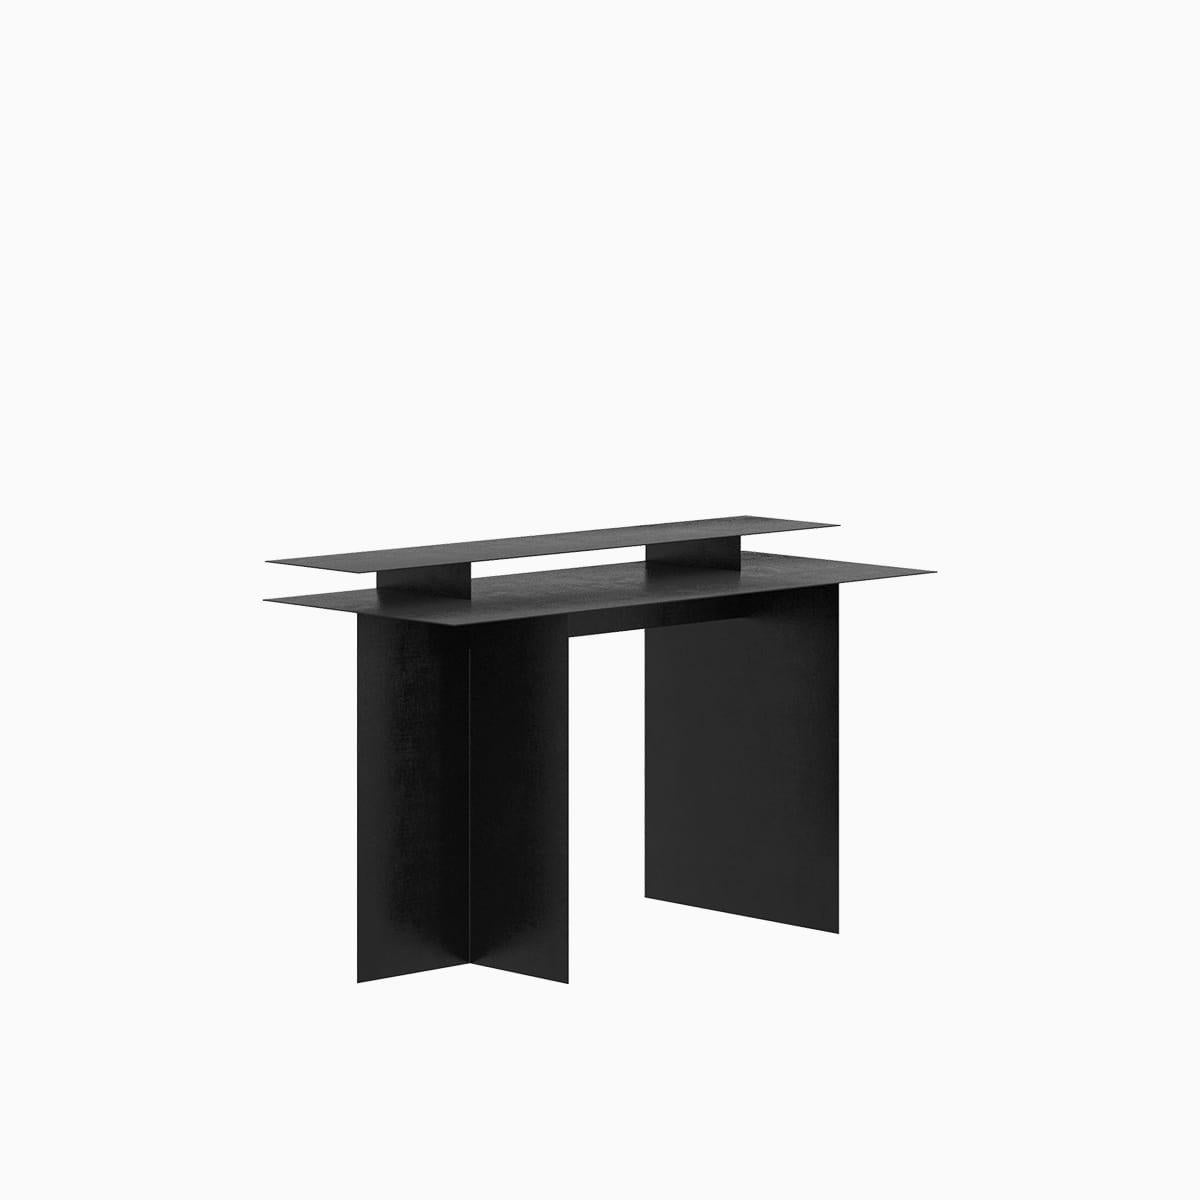 Conceptualized in 2023 by Leonardo Floresvillar, and crafted by hand with galvanized aluminum, coated with matte powder coating. 
The Ángulo Desk  was designed with two surface heights to work comfortably on a computer at your studio or at your home